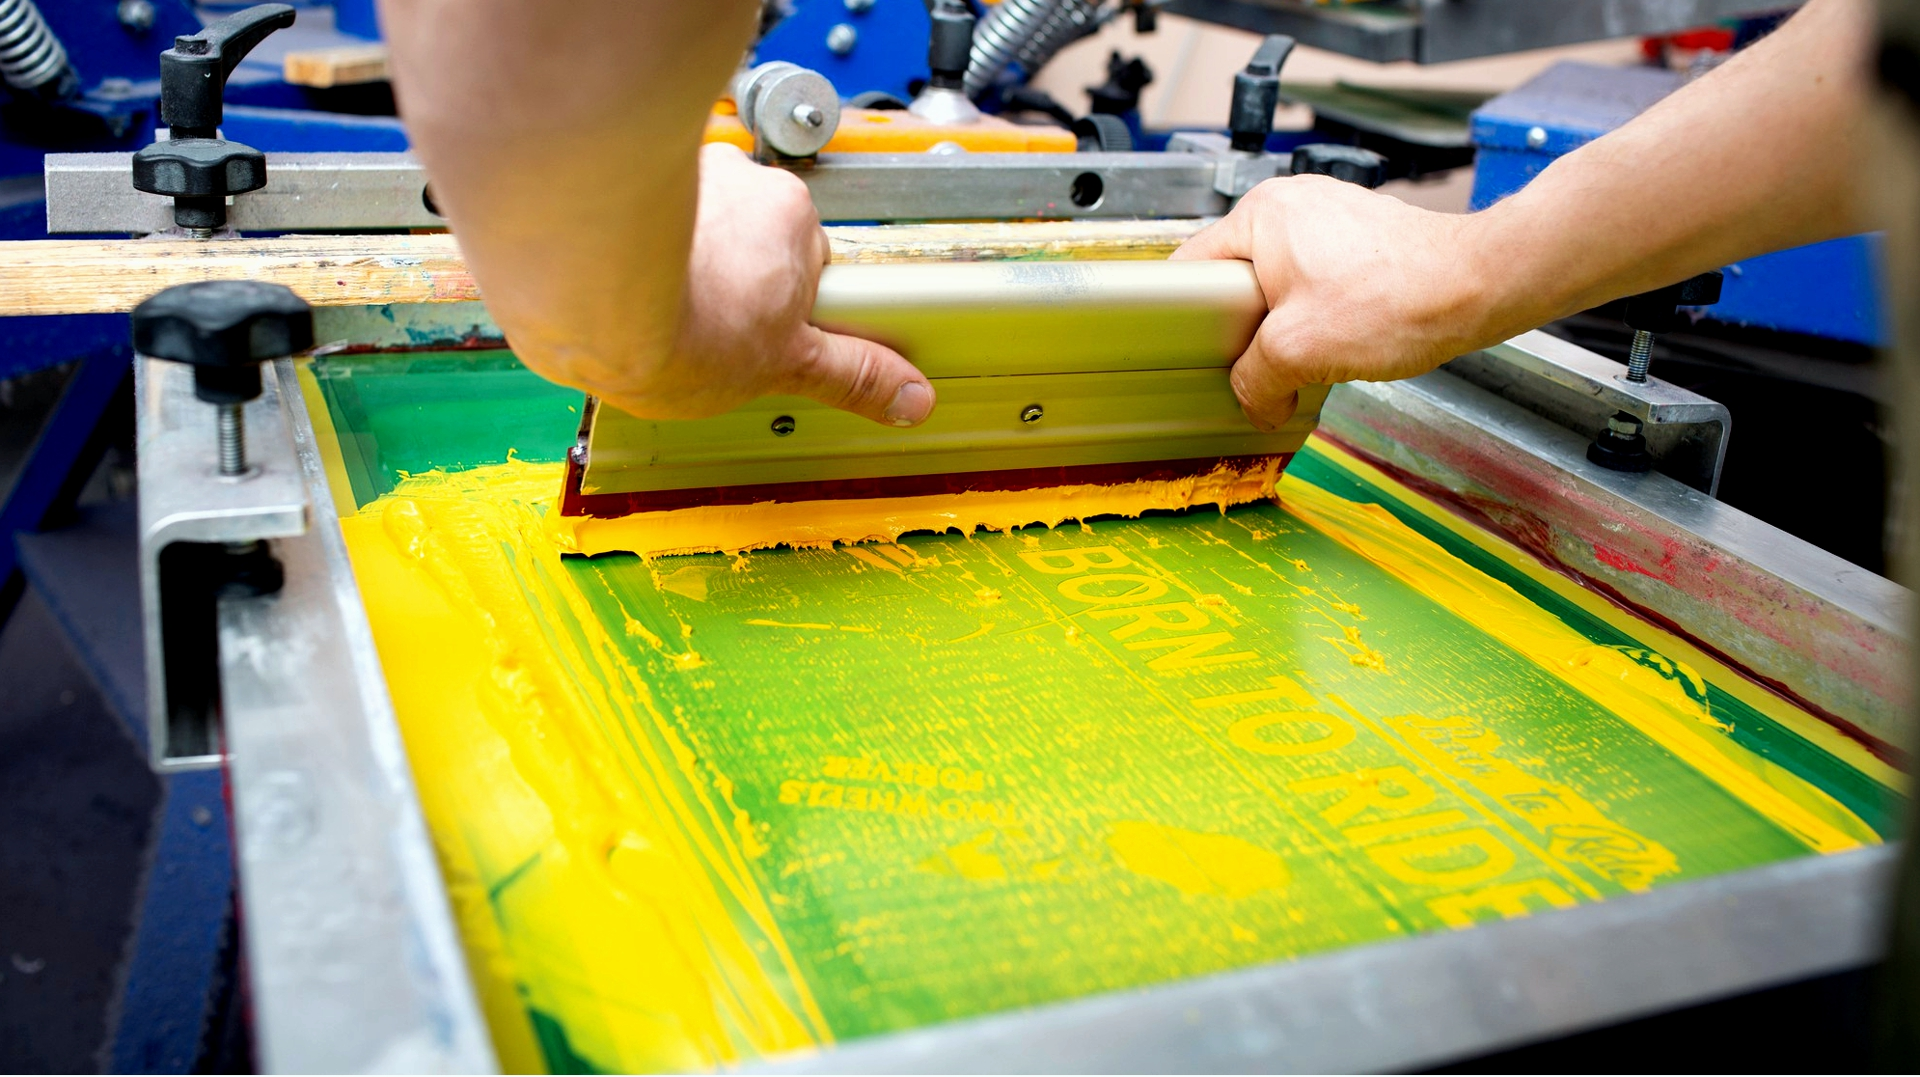 A person printing a design on a screen printing press using printing ink